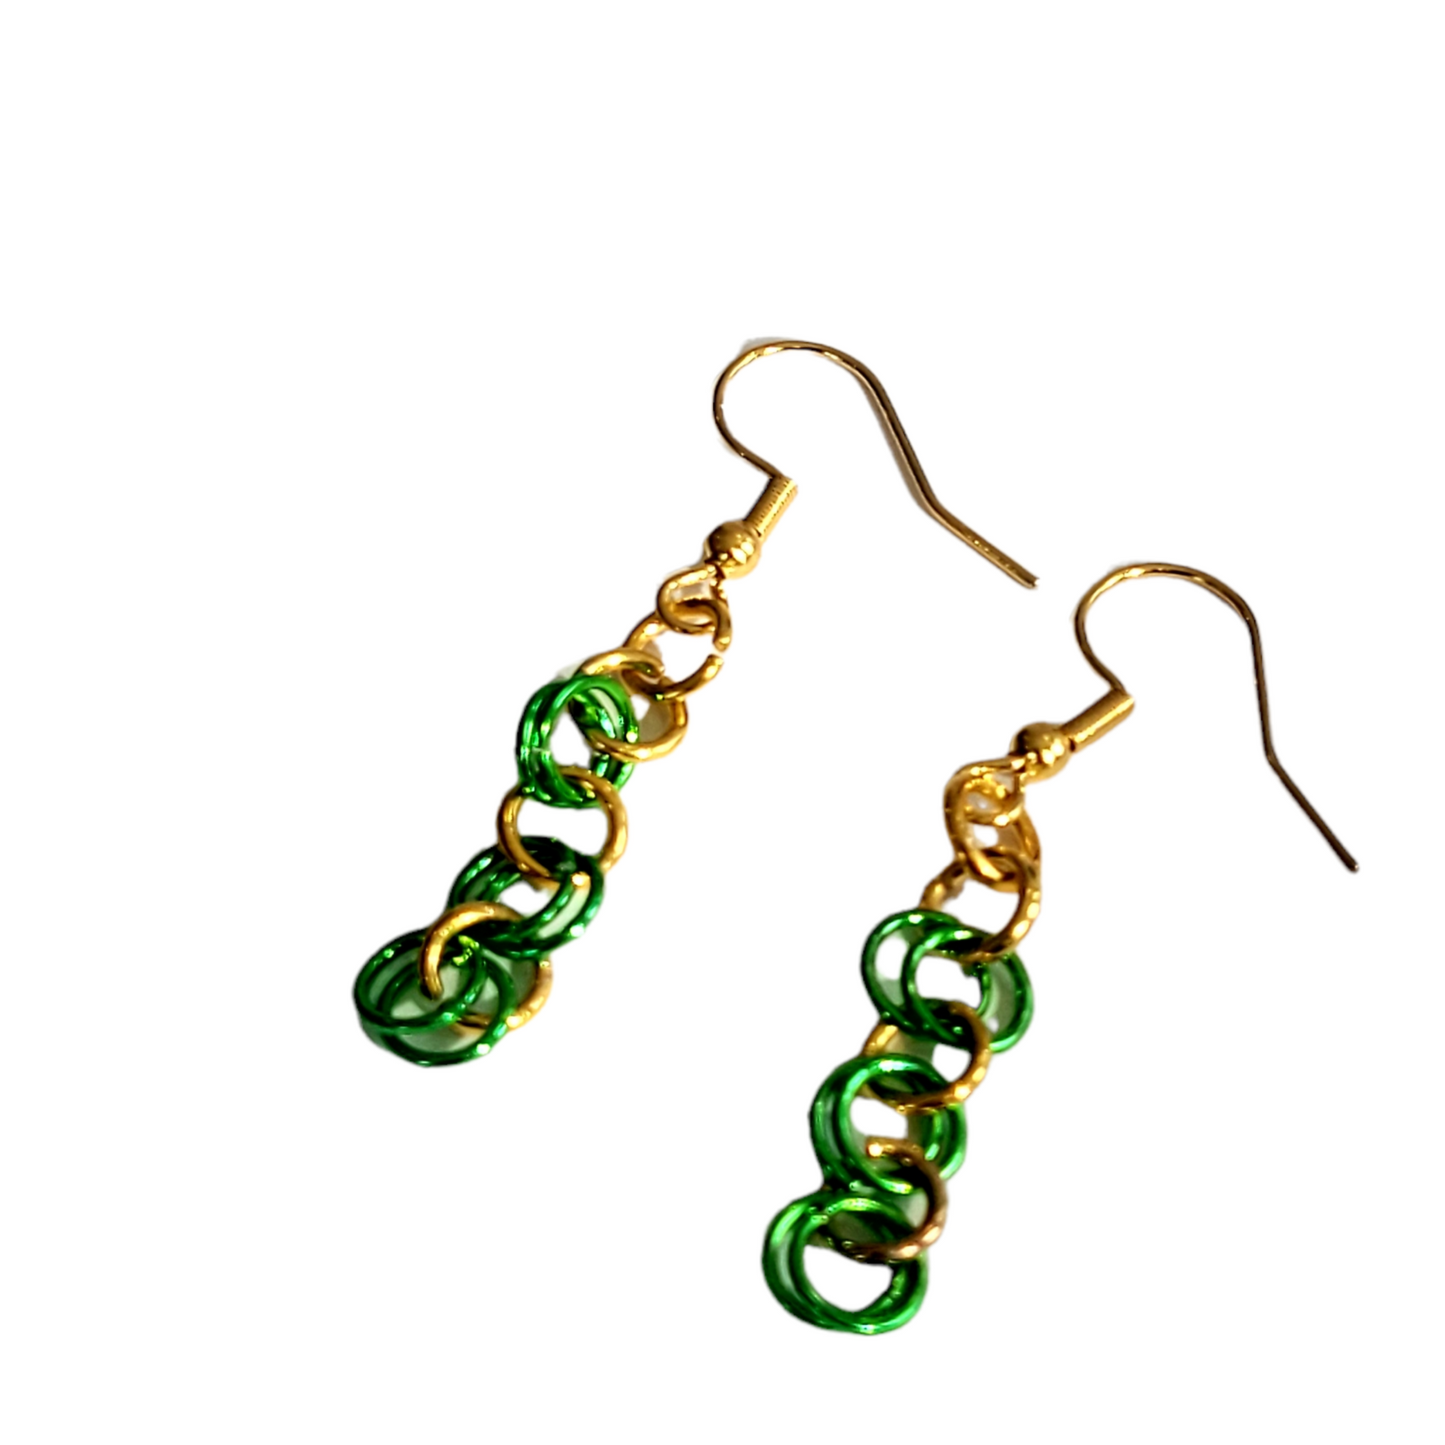 Bracelet and earring set, green and gold chainmail